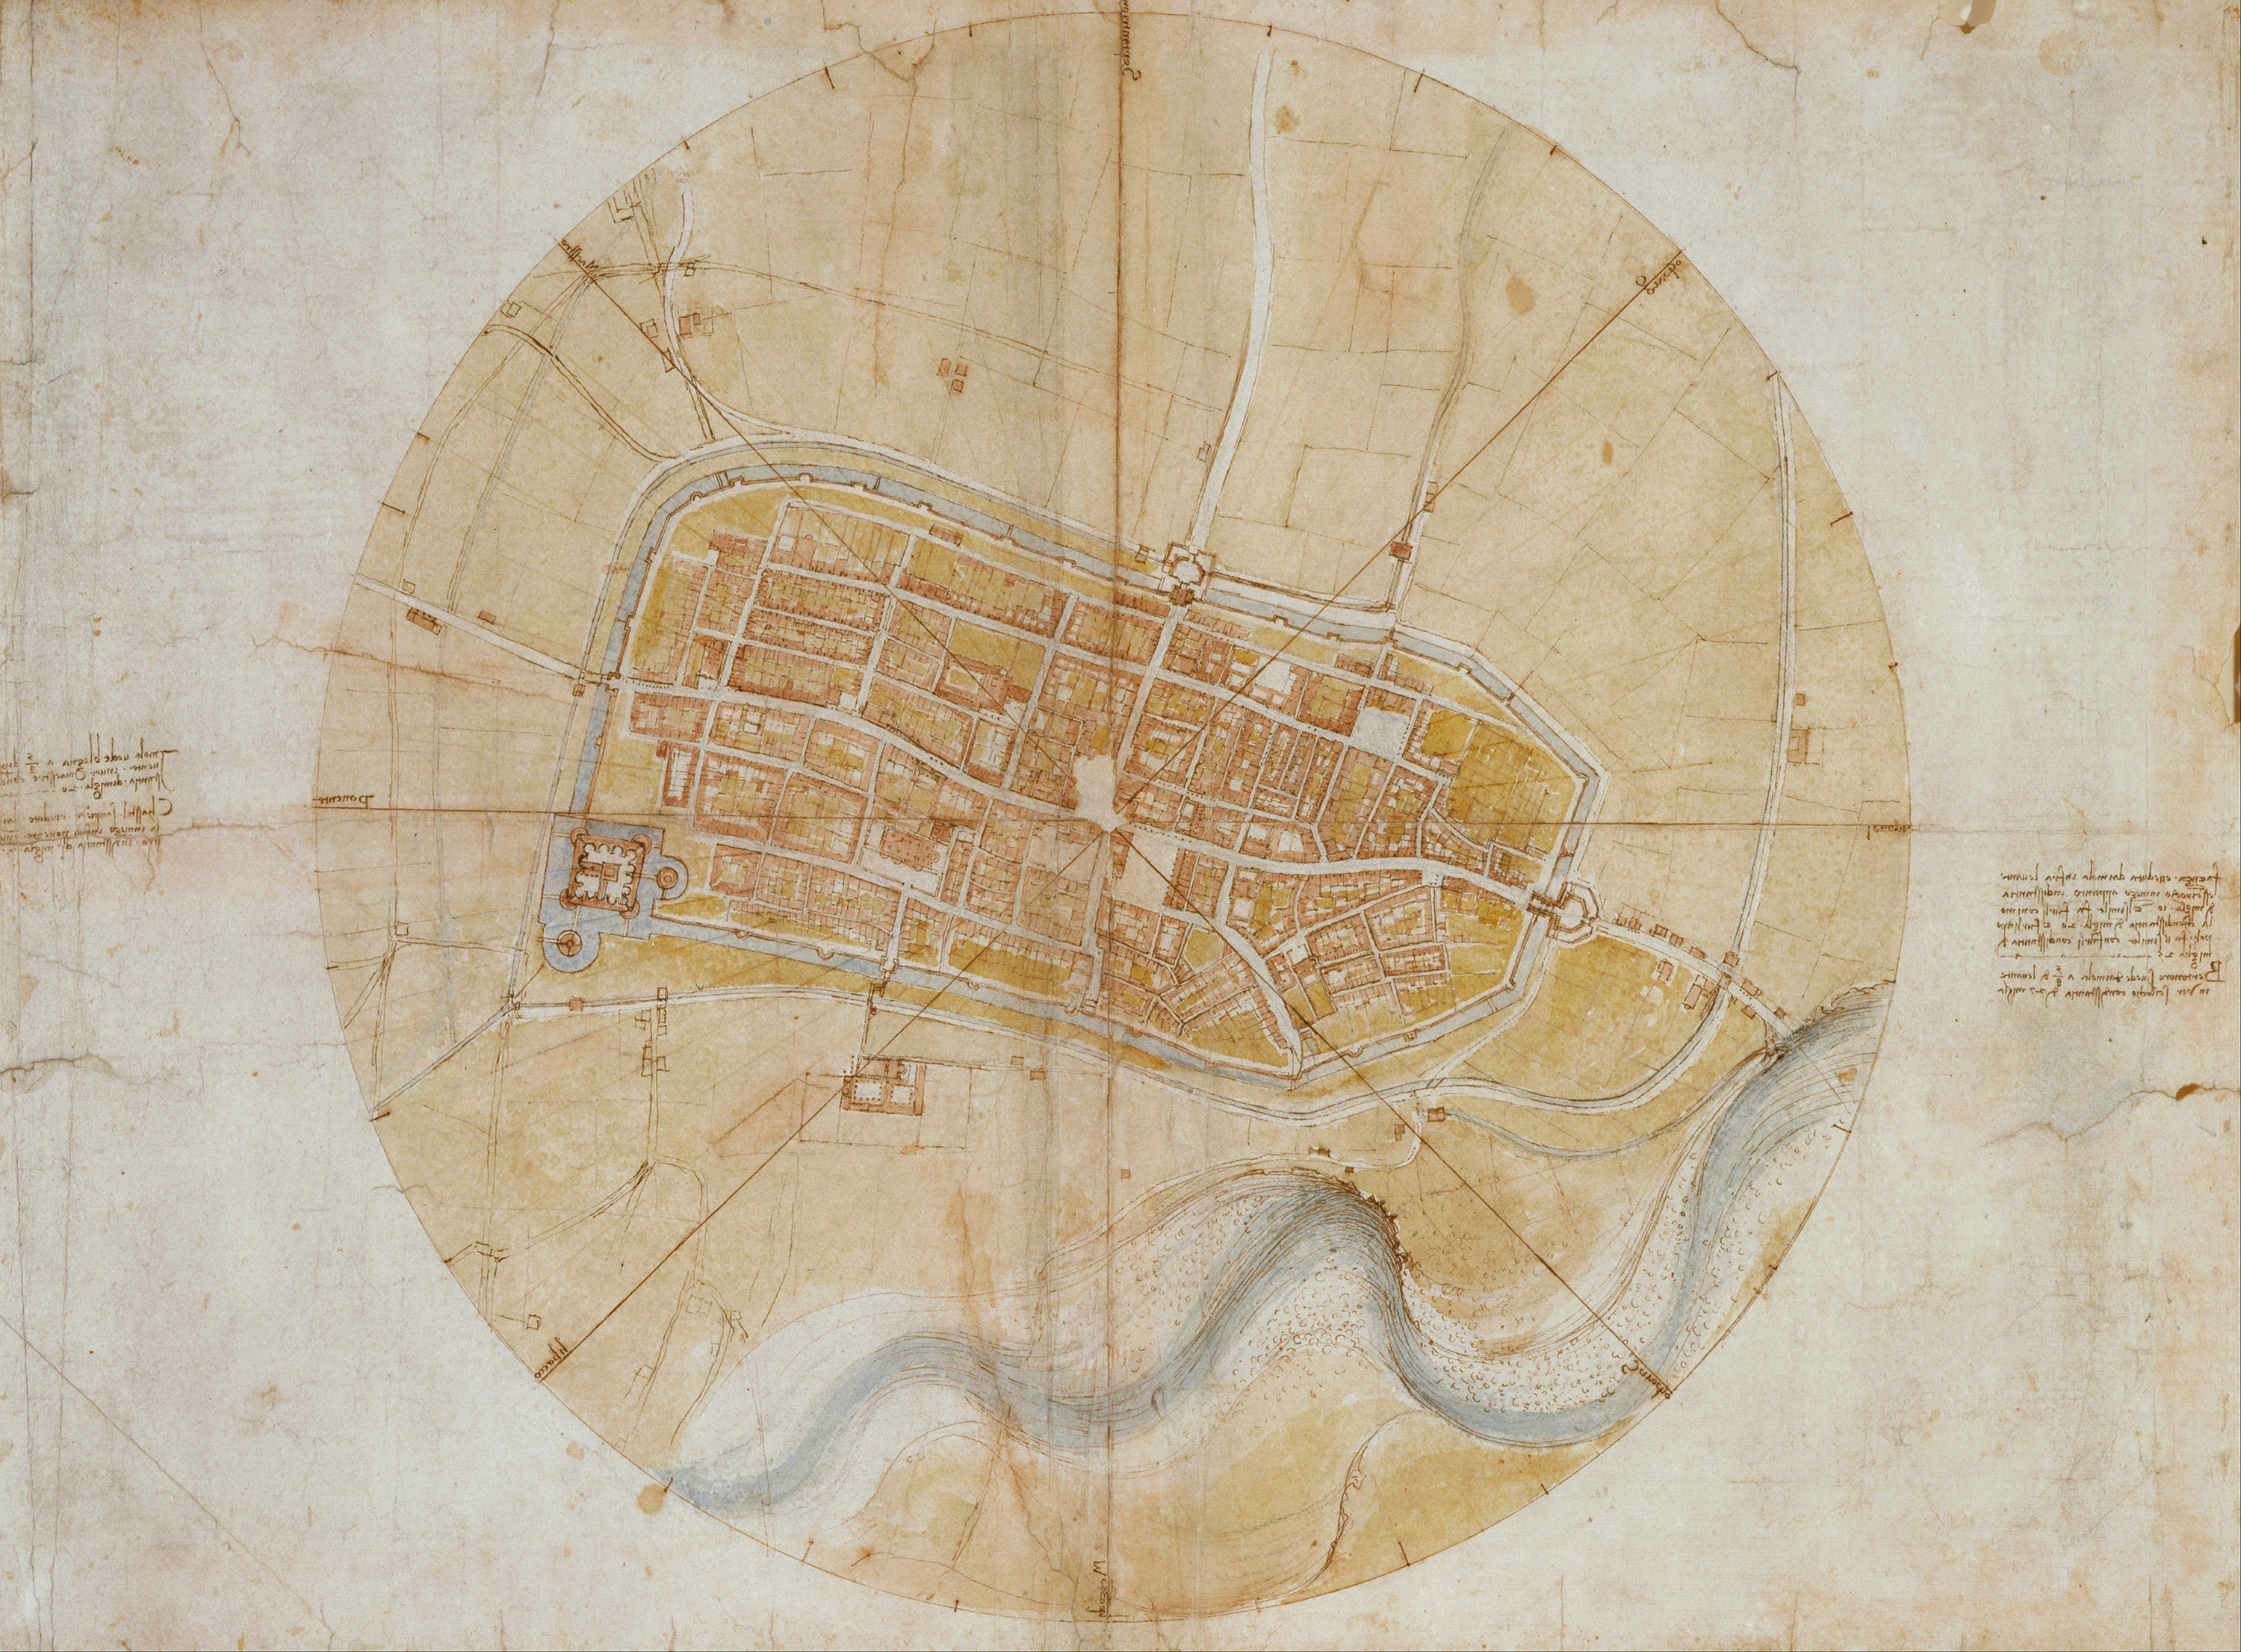 Leonardo da Vinci, Plan of Imola, 1502. Pen and ink, with coloured washes, and stylus lines, over black chalk  44.0 x 60.2 cm. Royal Collection Trust / © HM Queen Elizabeth II 2015 